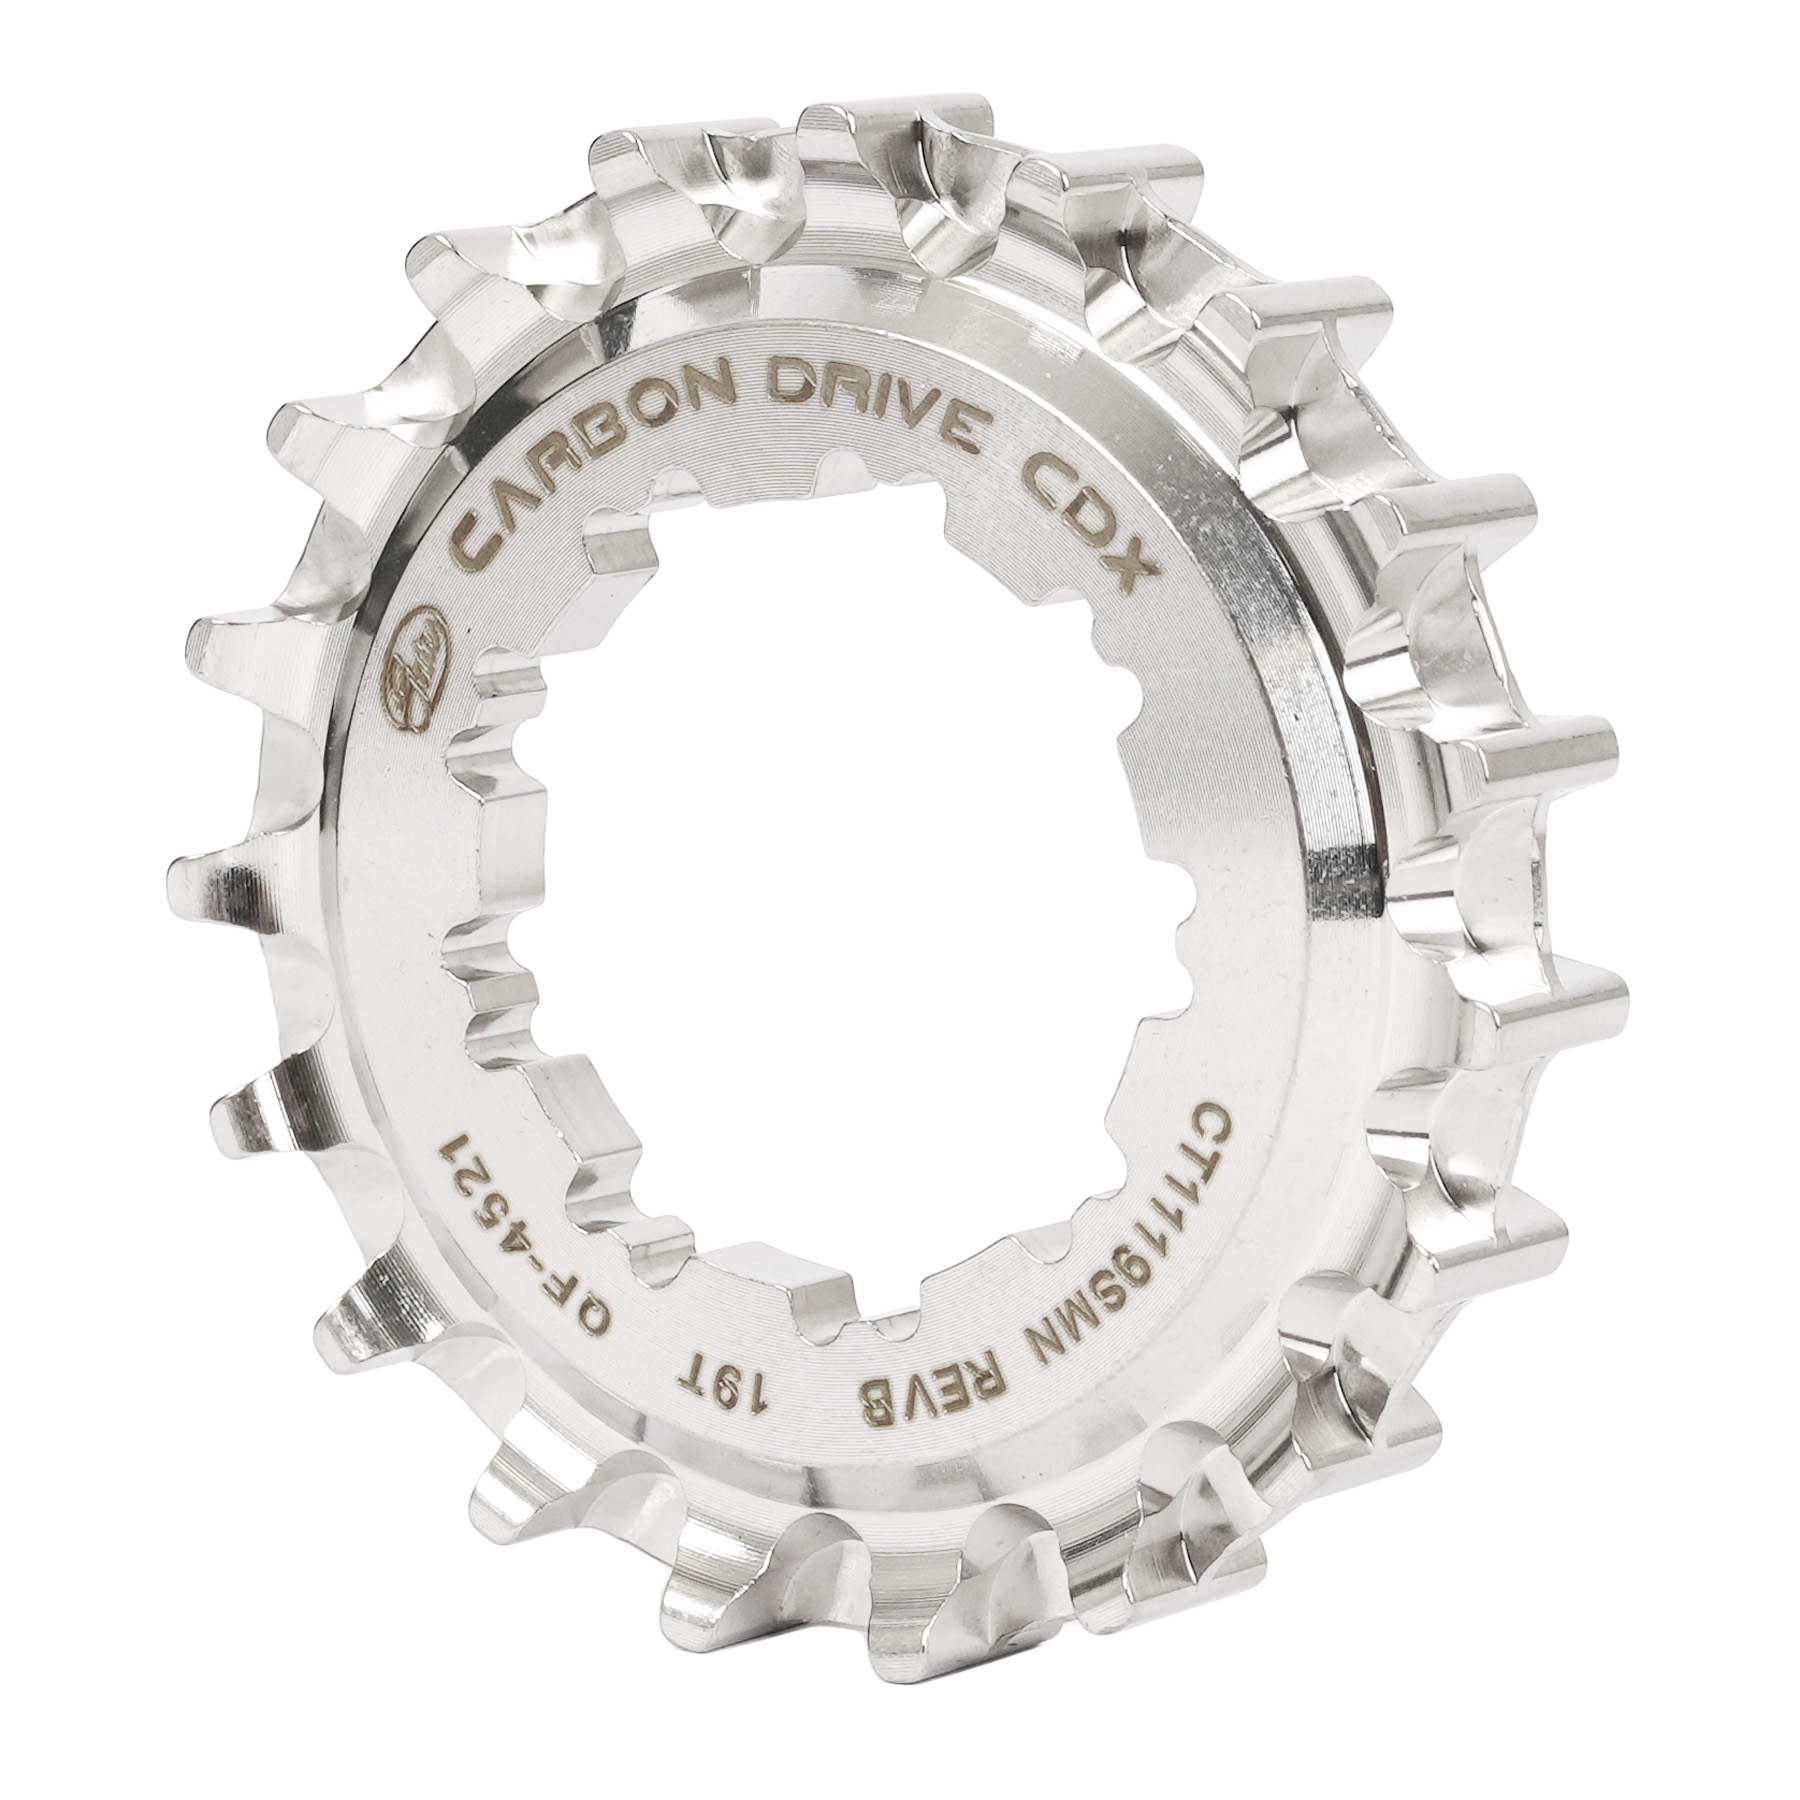 Picture of Gates Carbon Drive CDX Centertrack Sprocket - Rear | HG 9 Spline - stainless steel